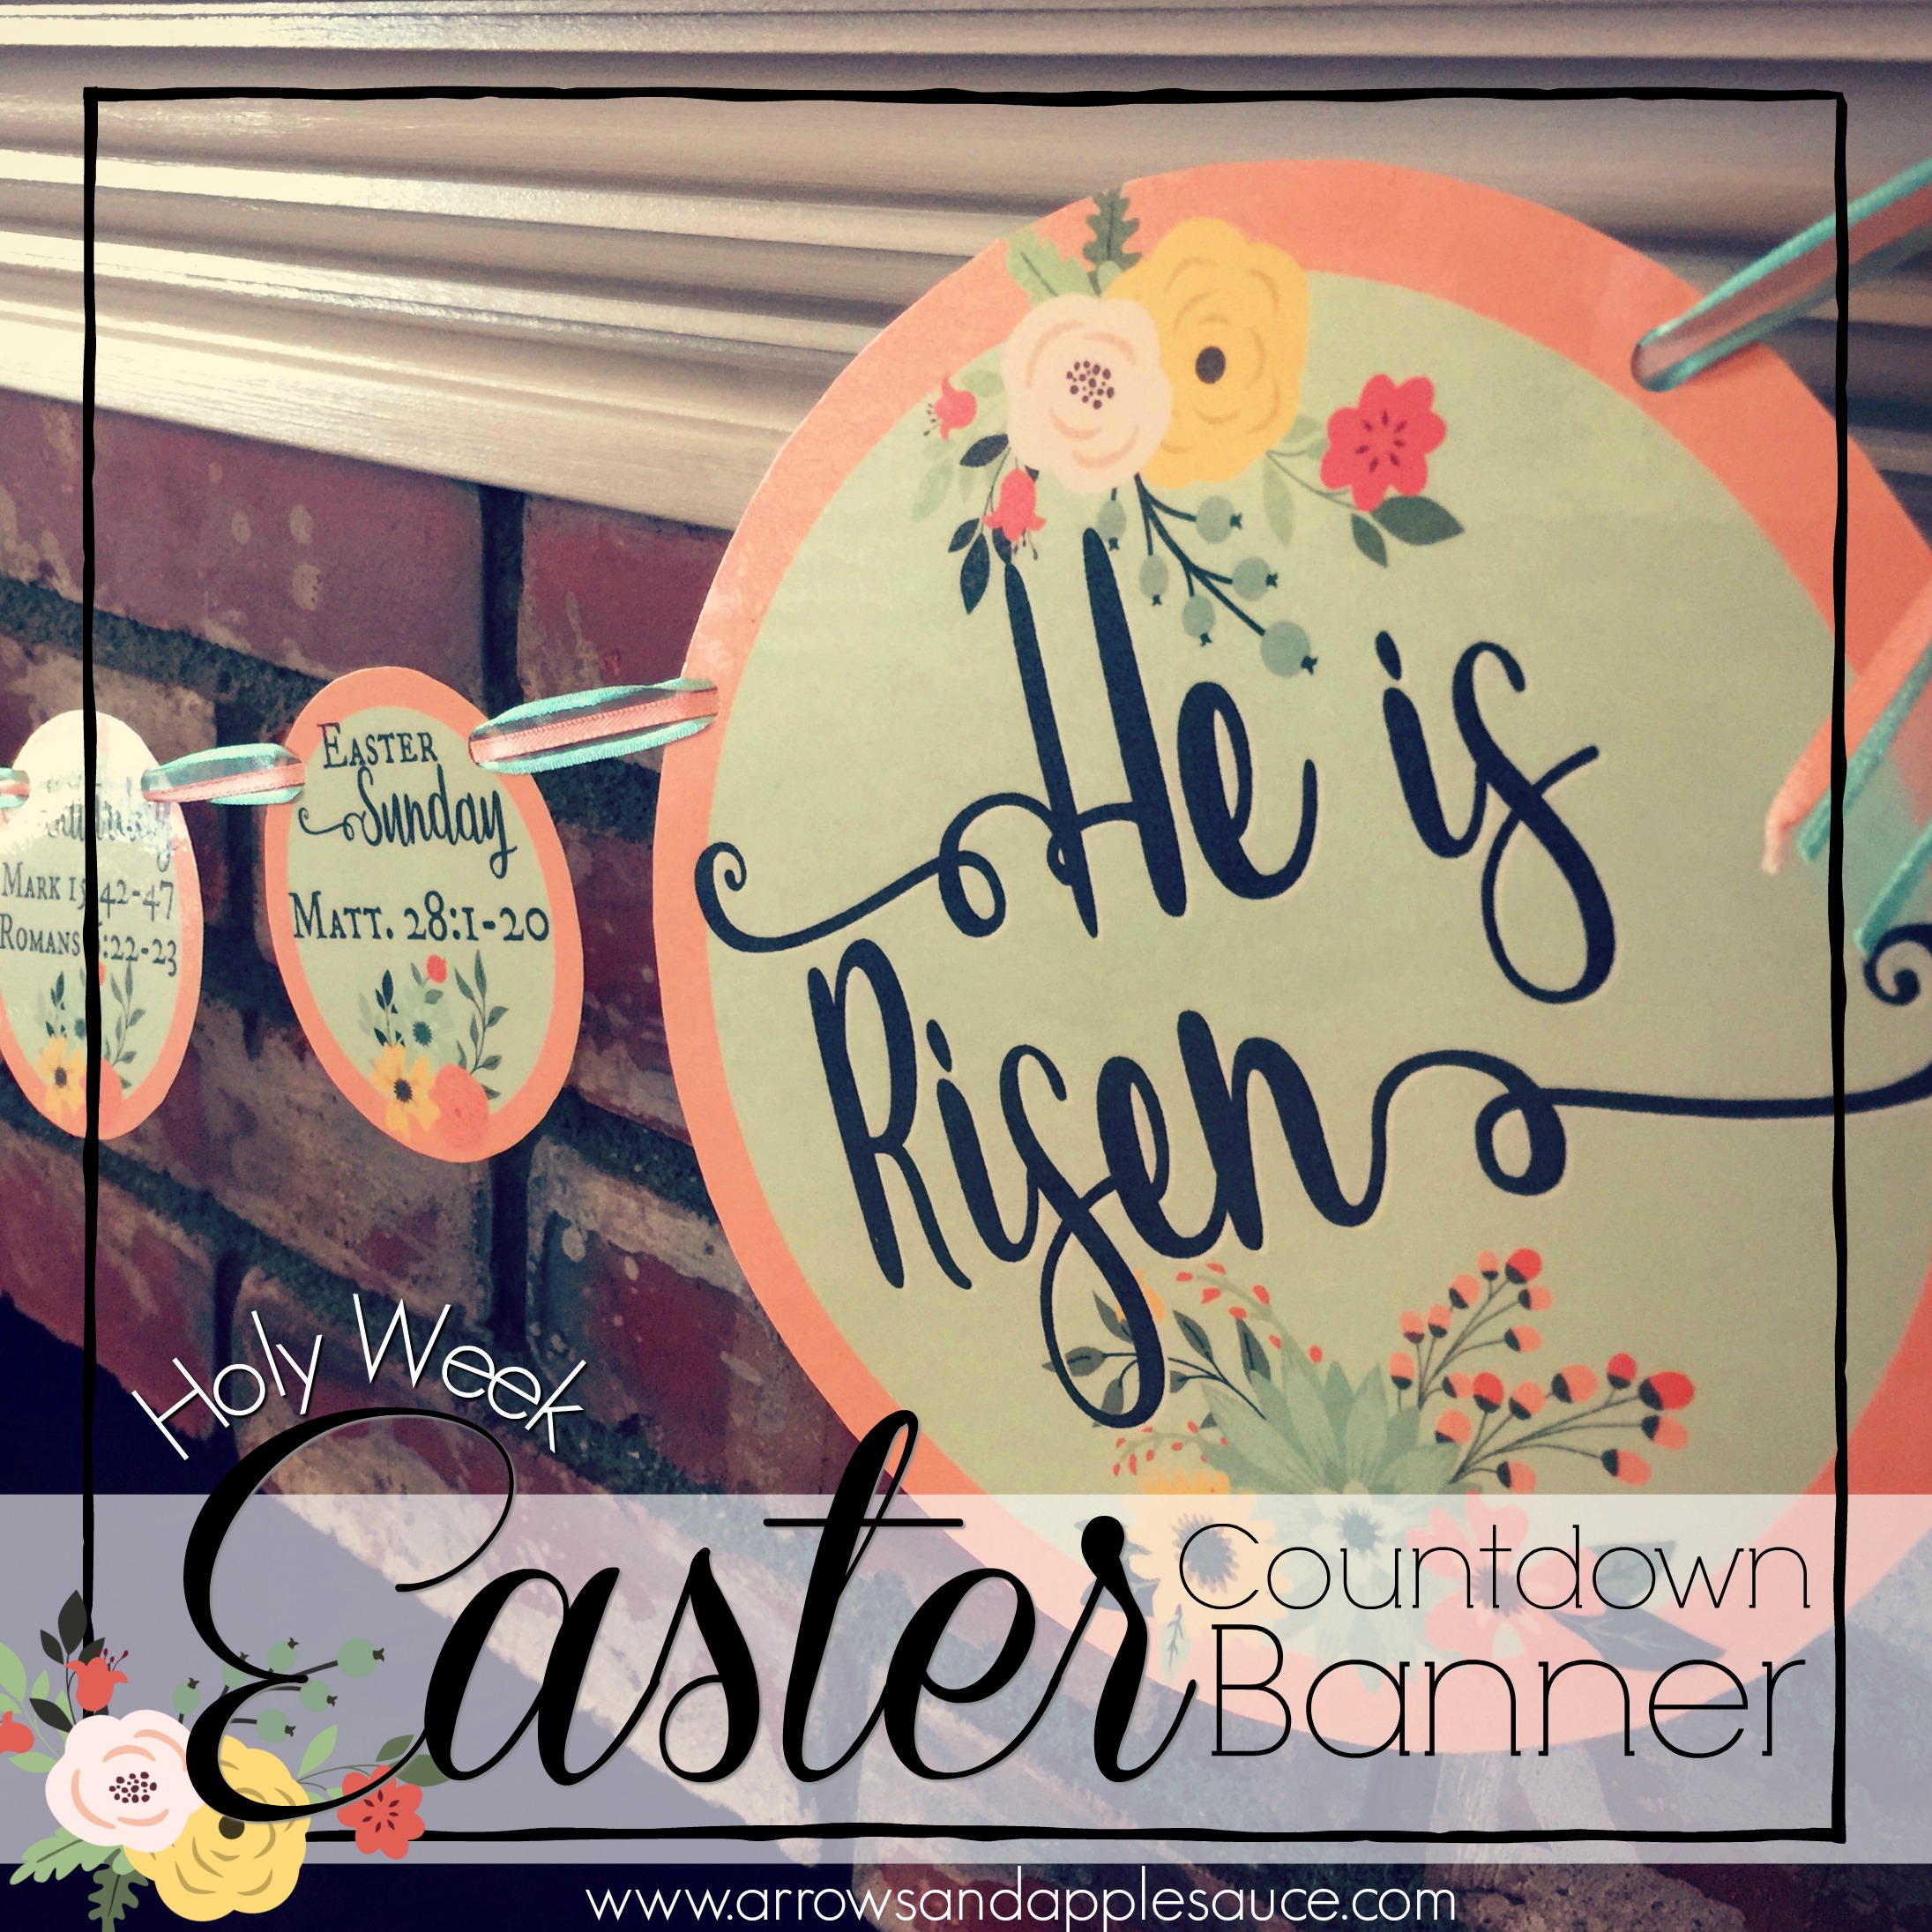 Teach your little ones about Holy Week (Passion Week) and learn about the events that transpired during the week before and on Easter Sunday. #Easter #HolyWeek #Printables #KidsEasterActivities #PassionWeek